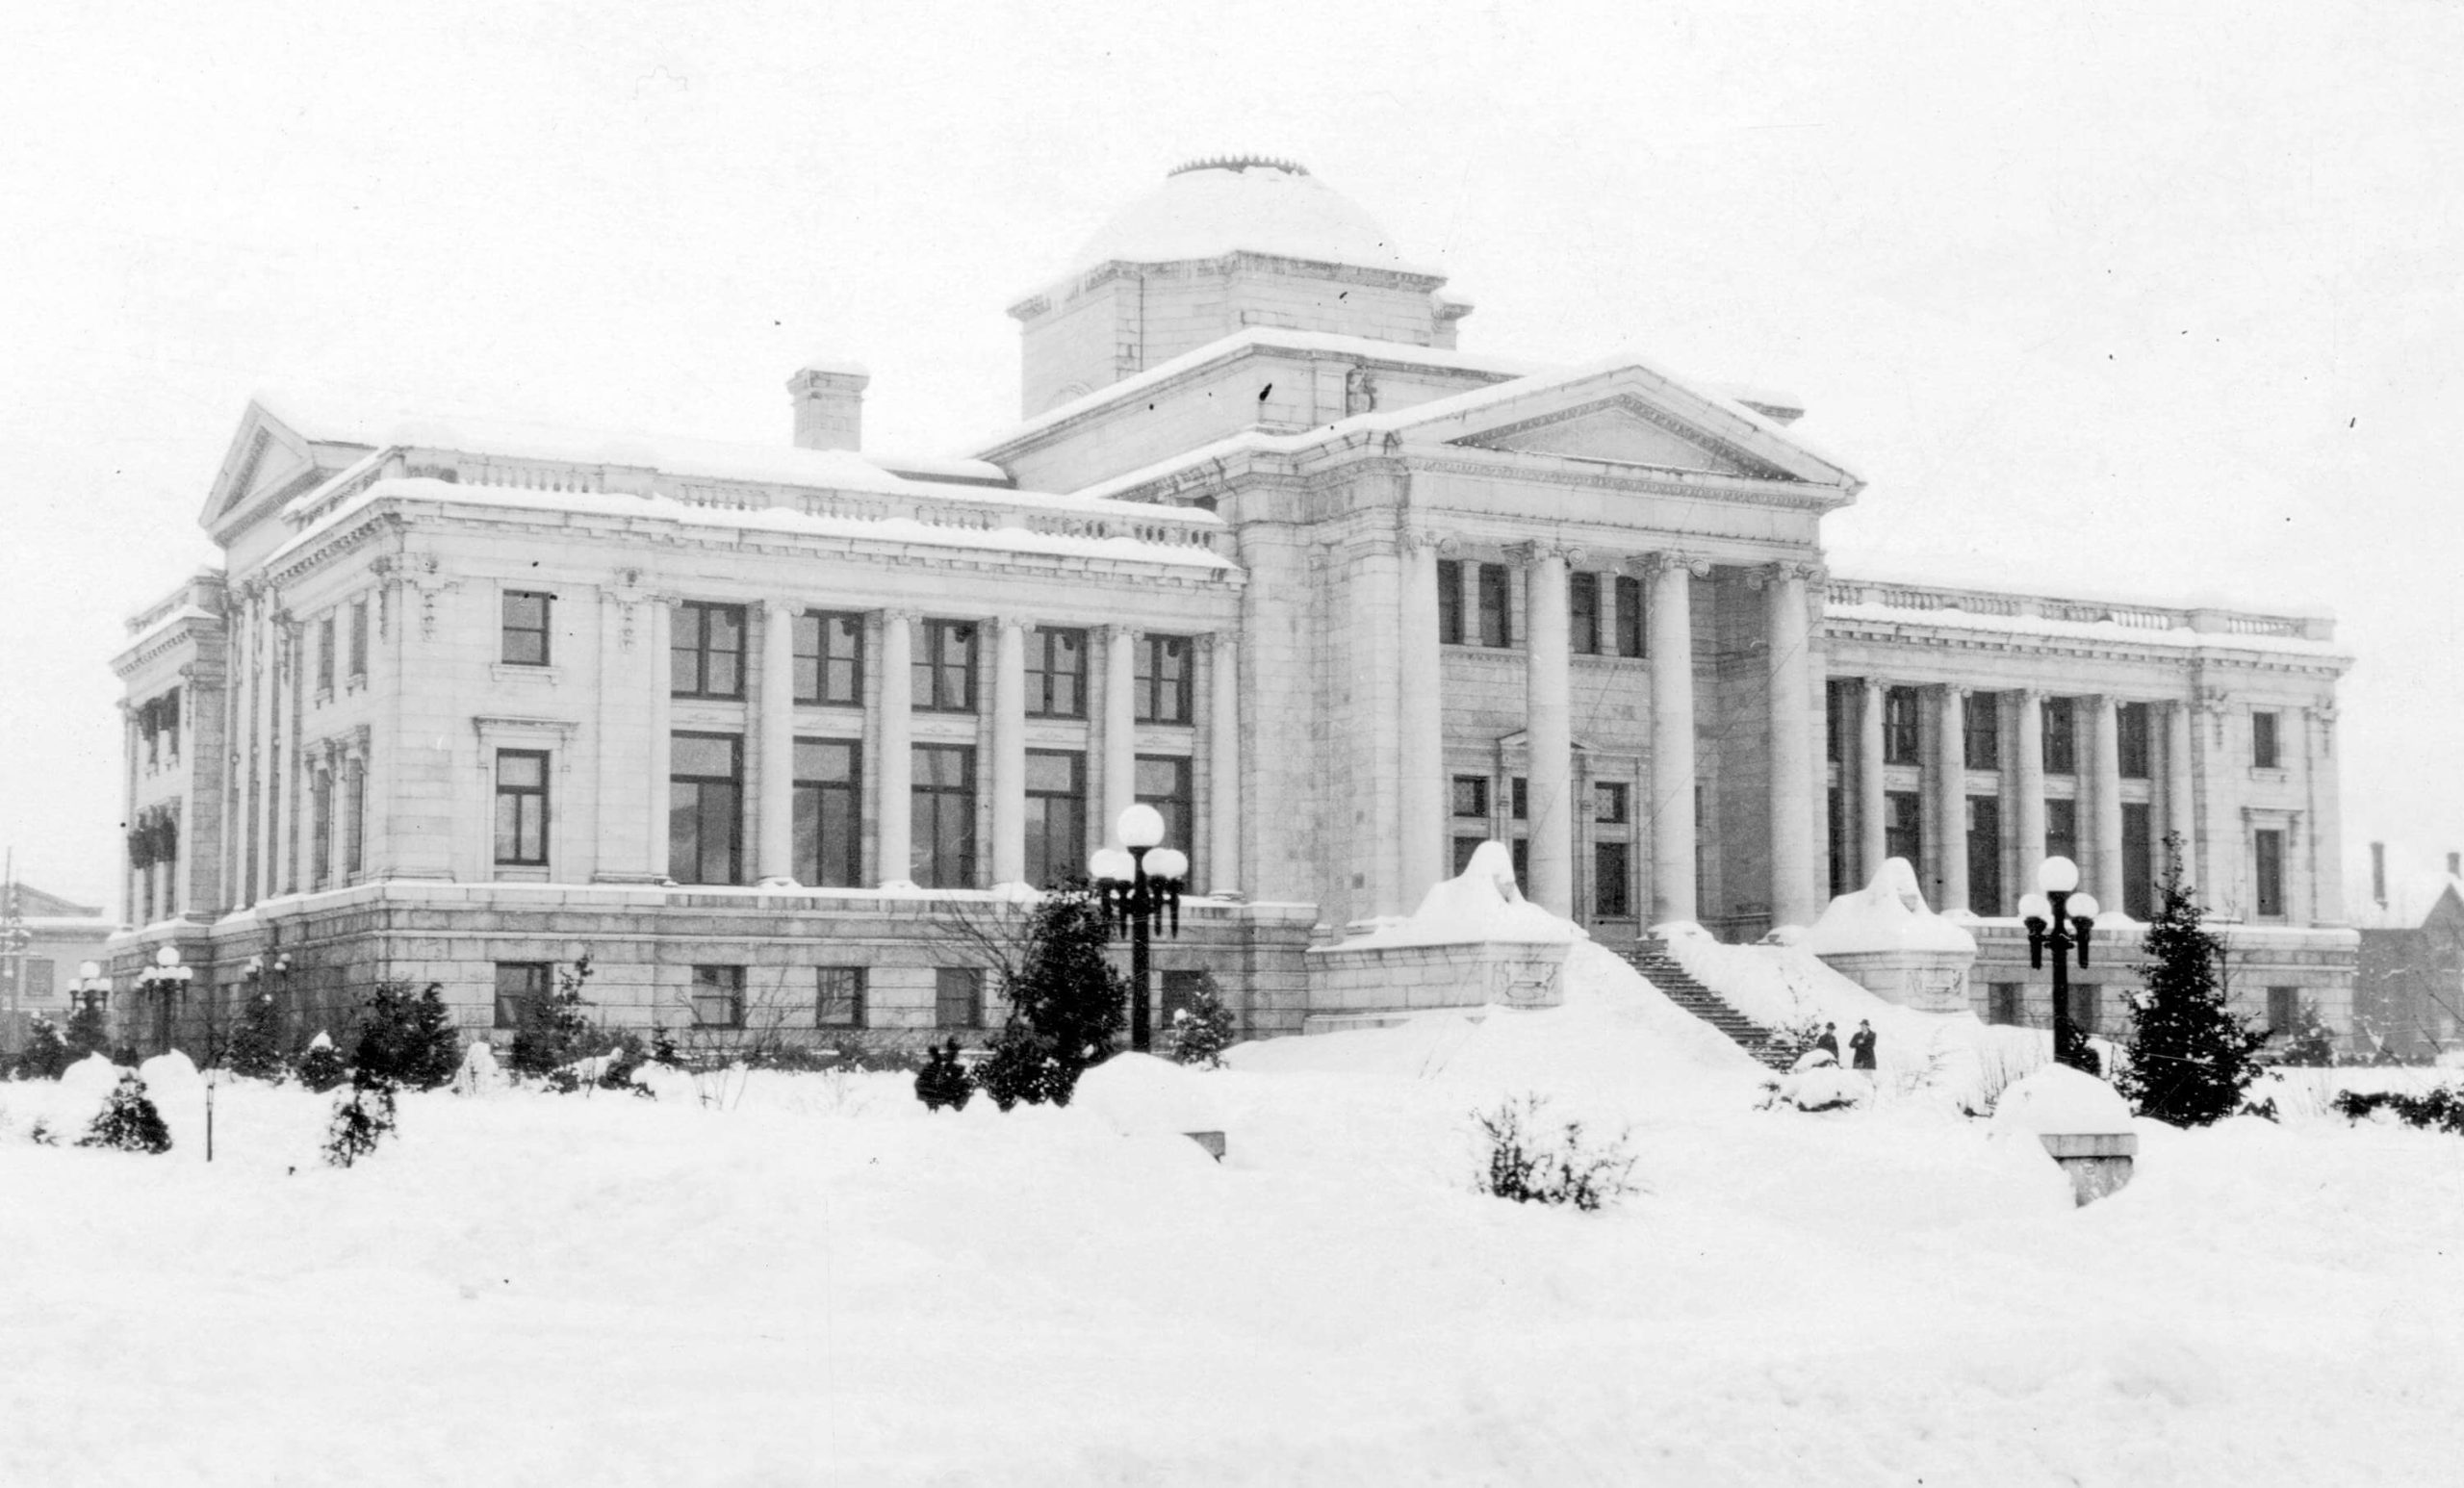 1916 - The courthouse covered with snow